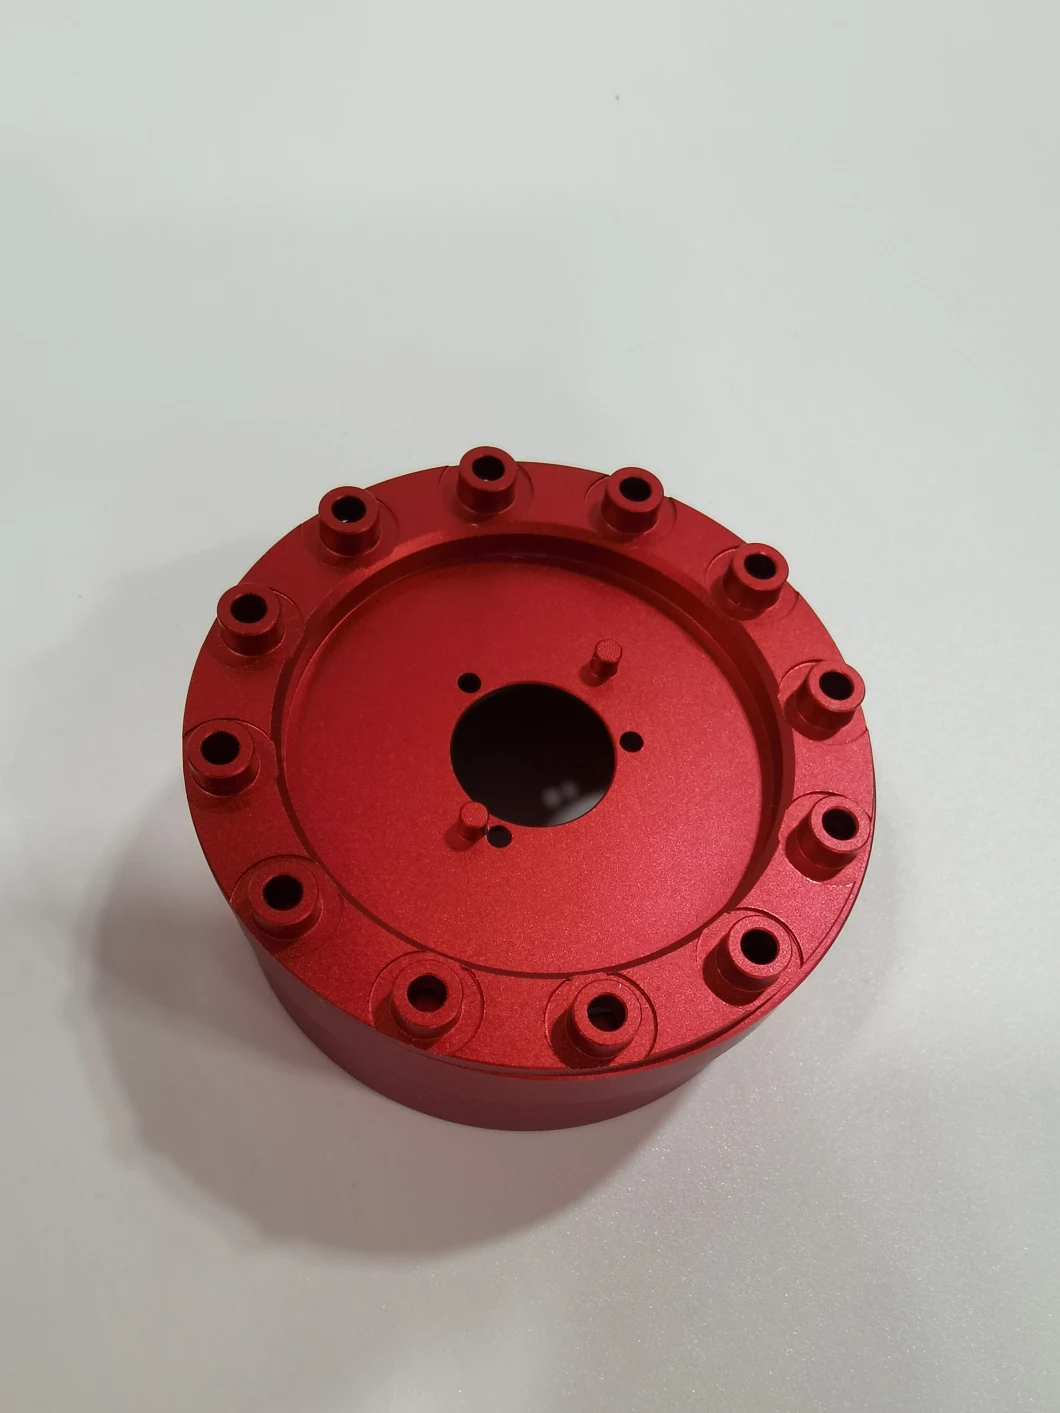 6061 Aluminum CNC Machining Parts Red Anodized Surface Treatment